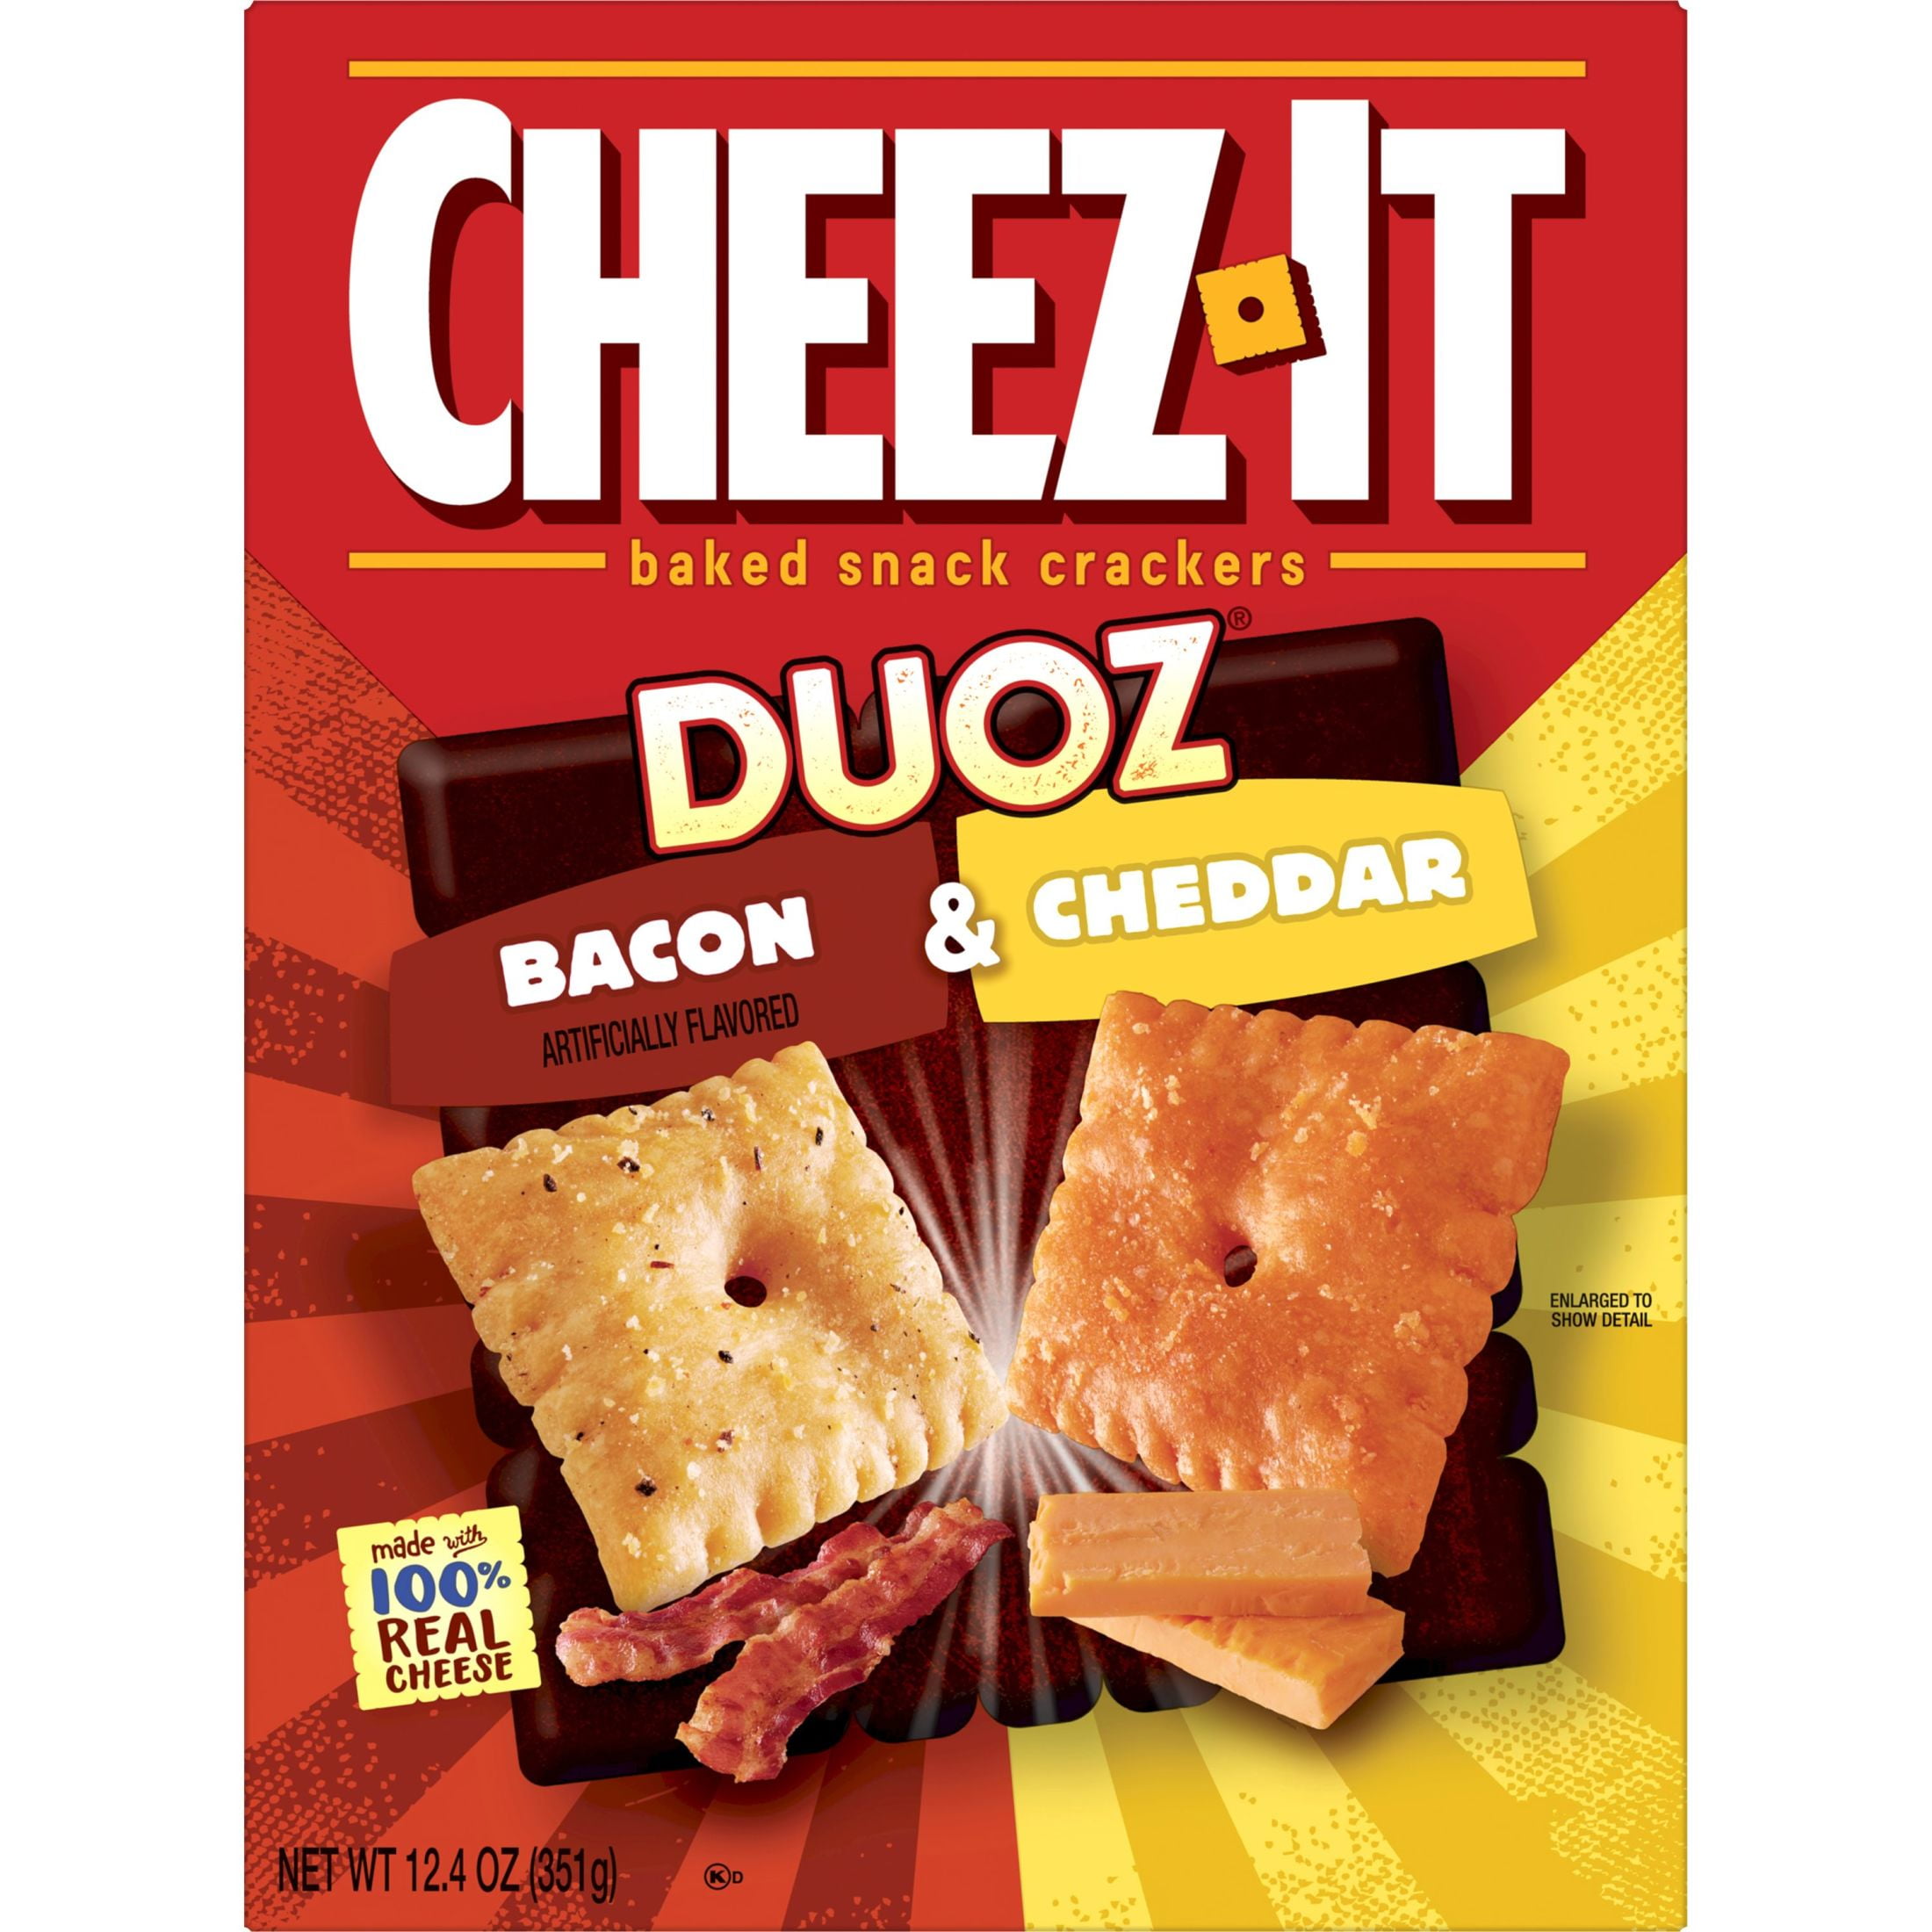 Cheez-It DUOZ Bacon and Cheddar Crackers 124 oz